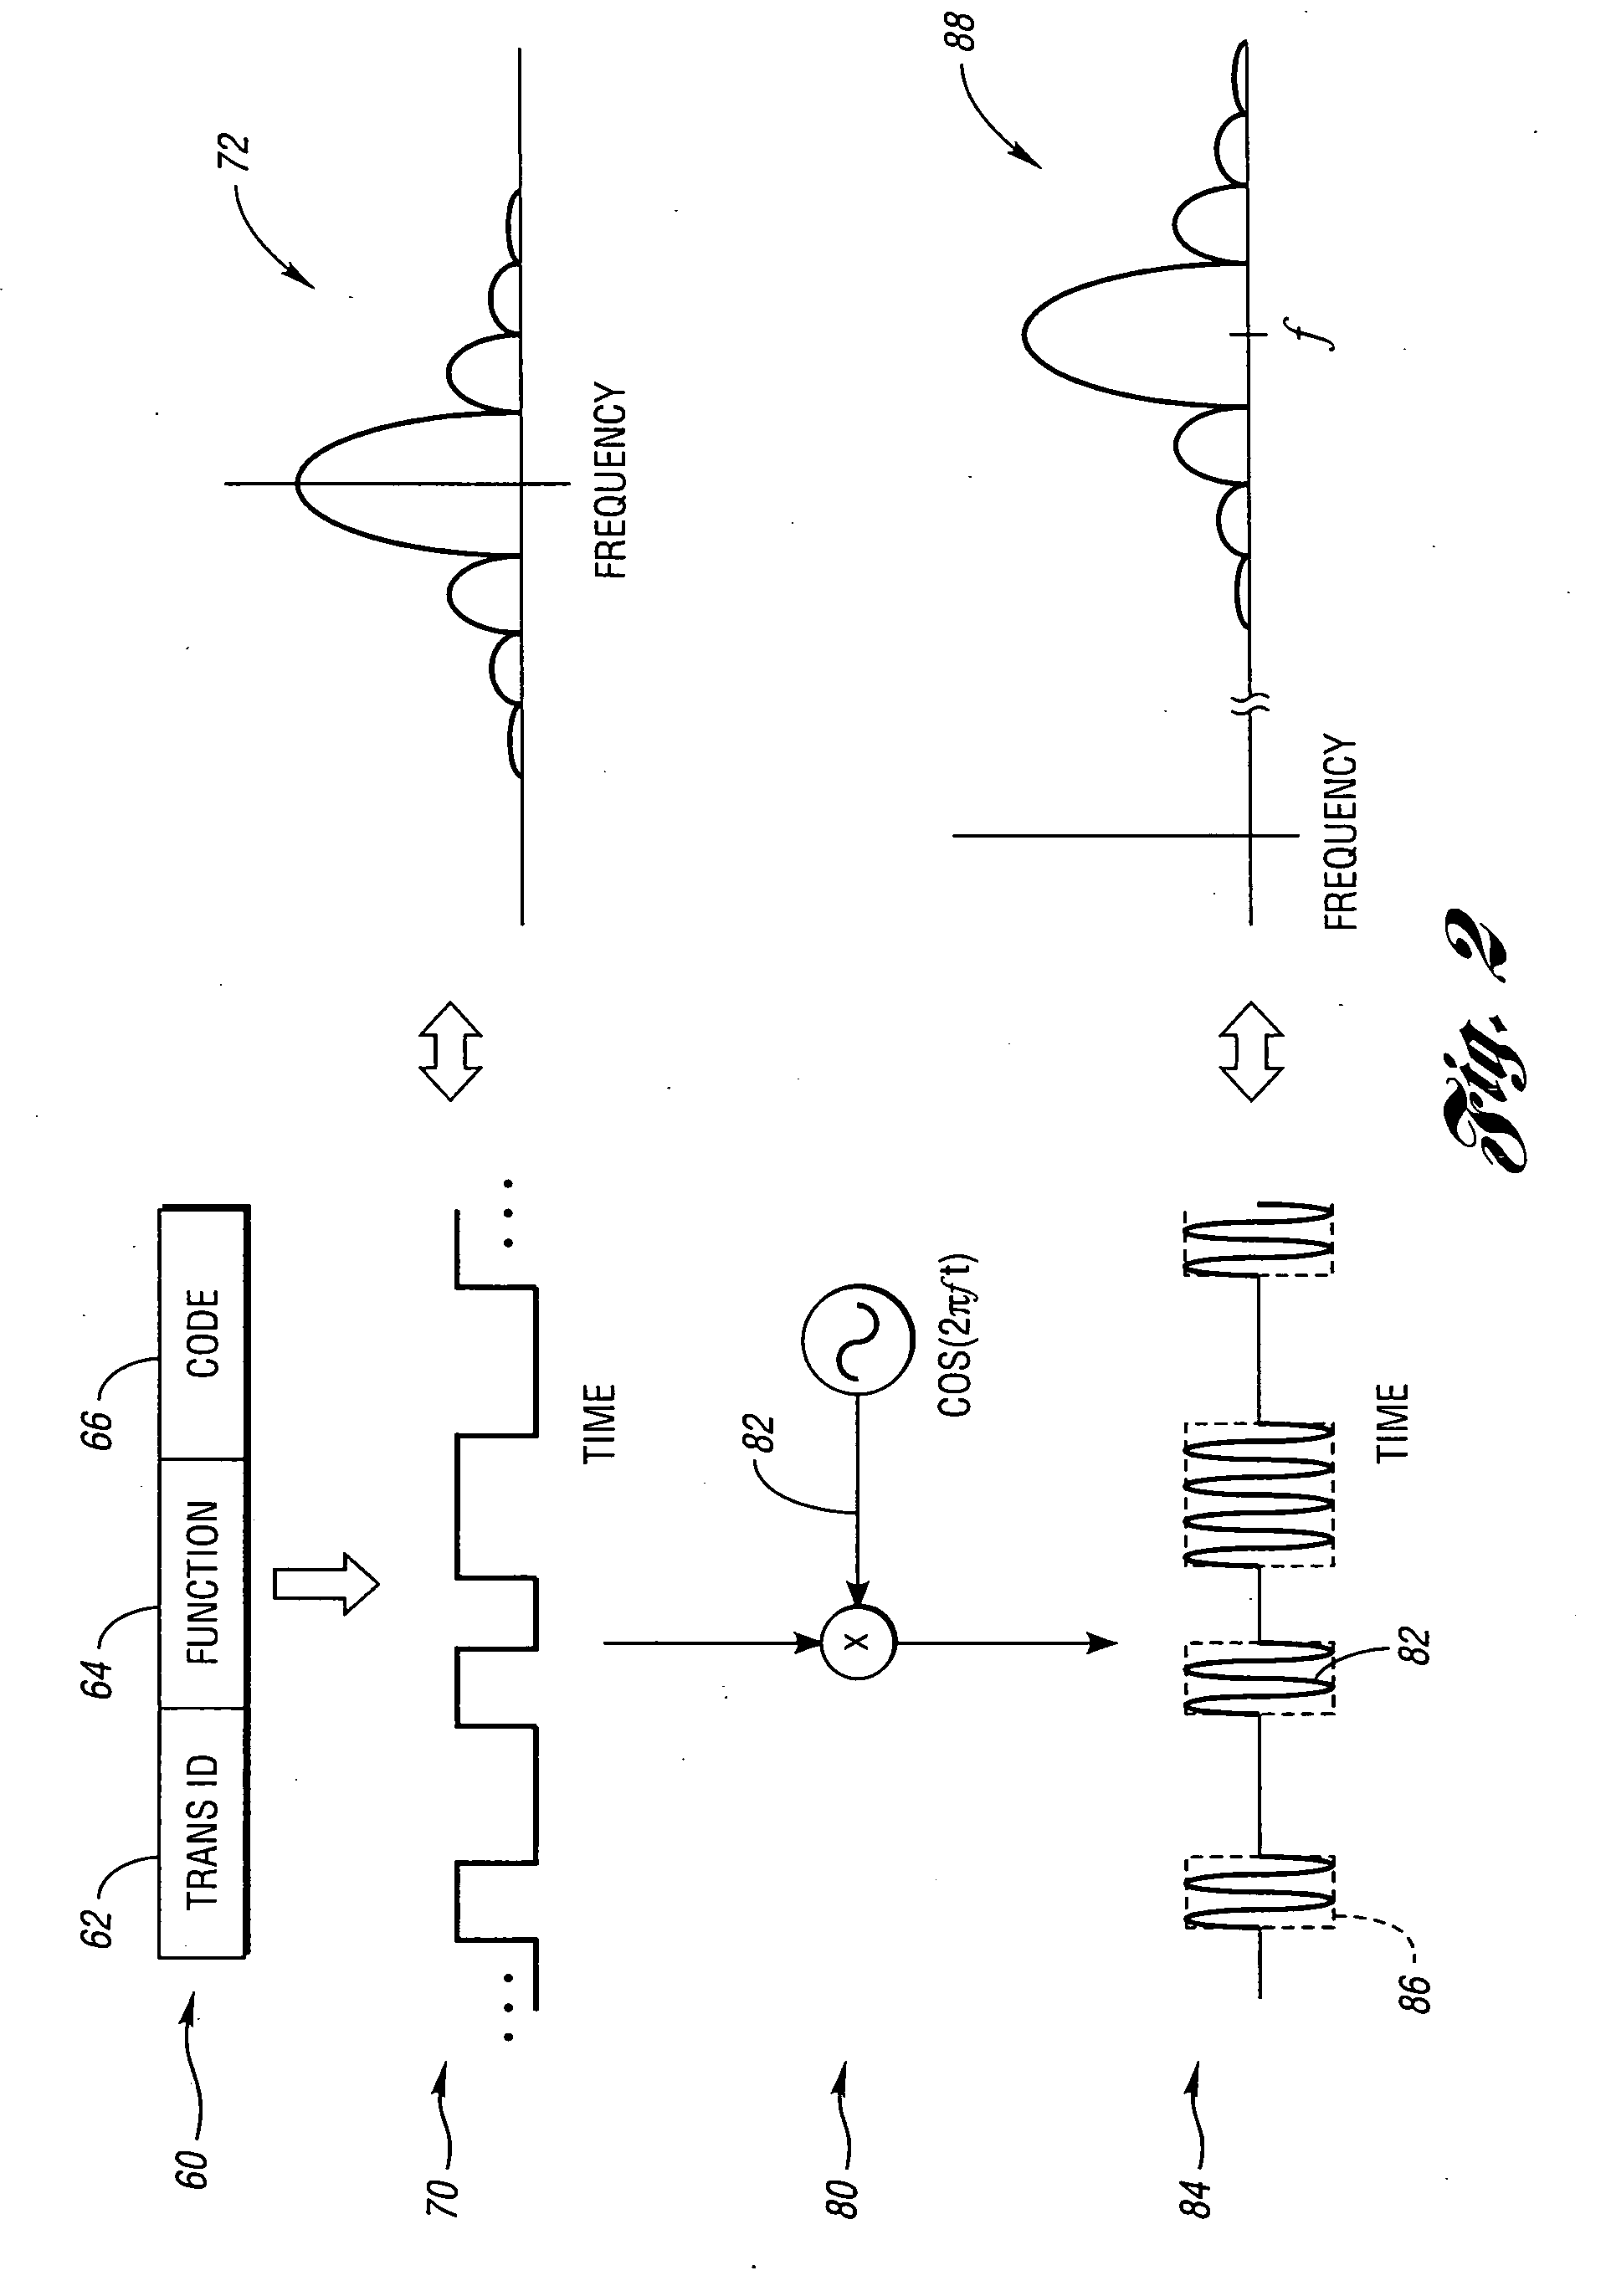 Appliance remote control having separated user control and transmitter modules remotely located from and directly connected to one another